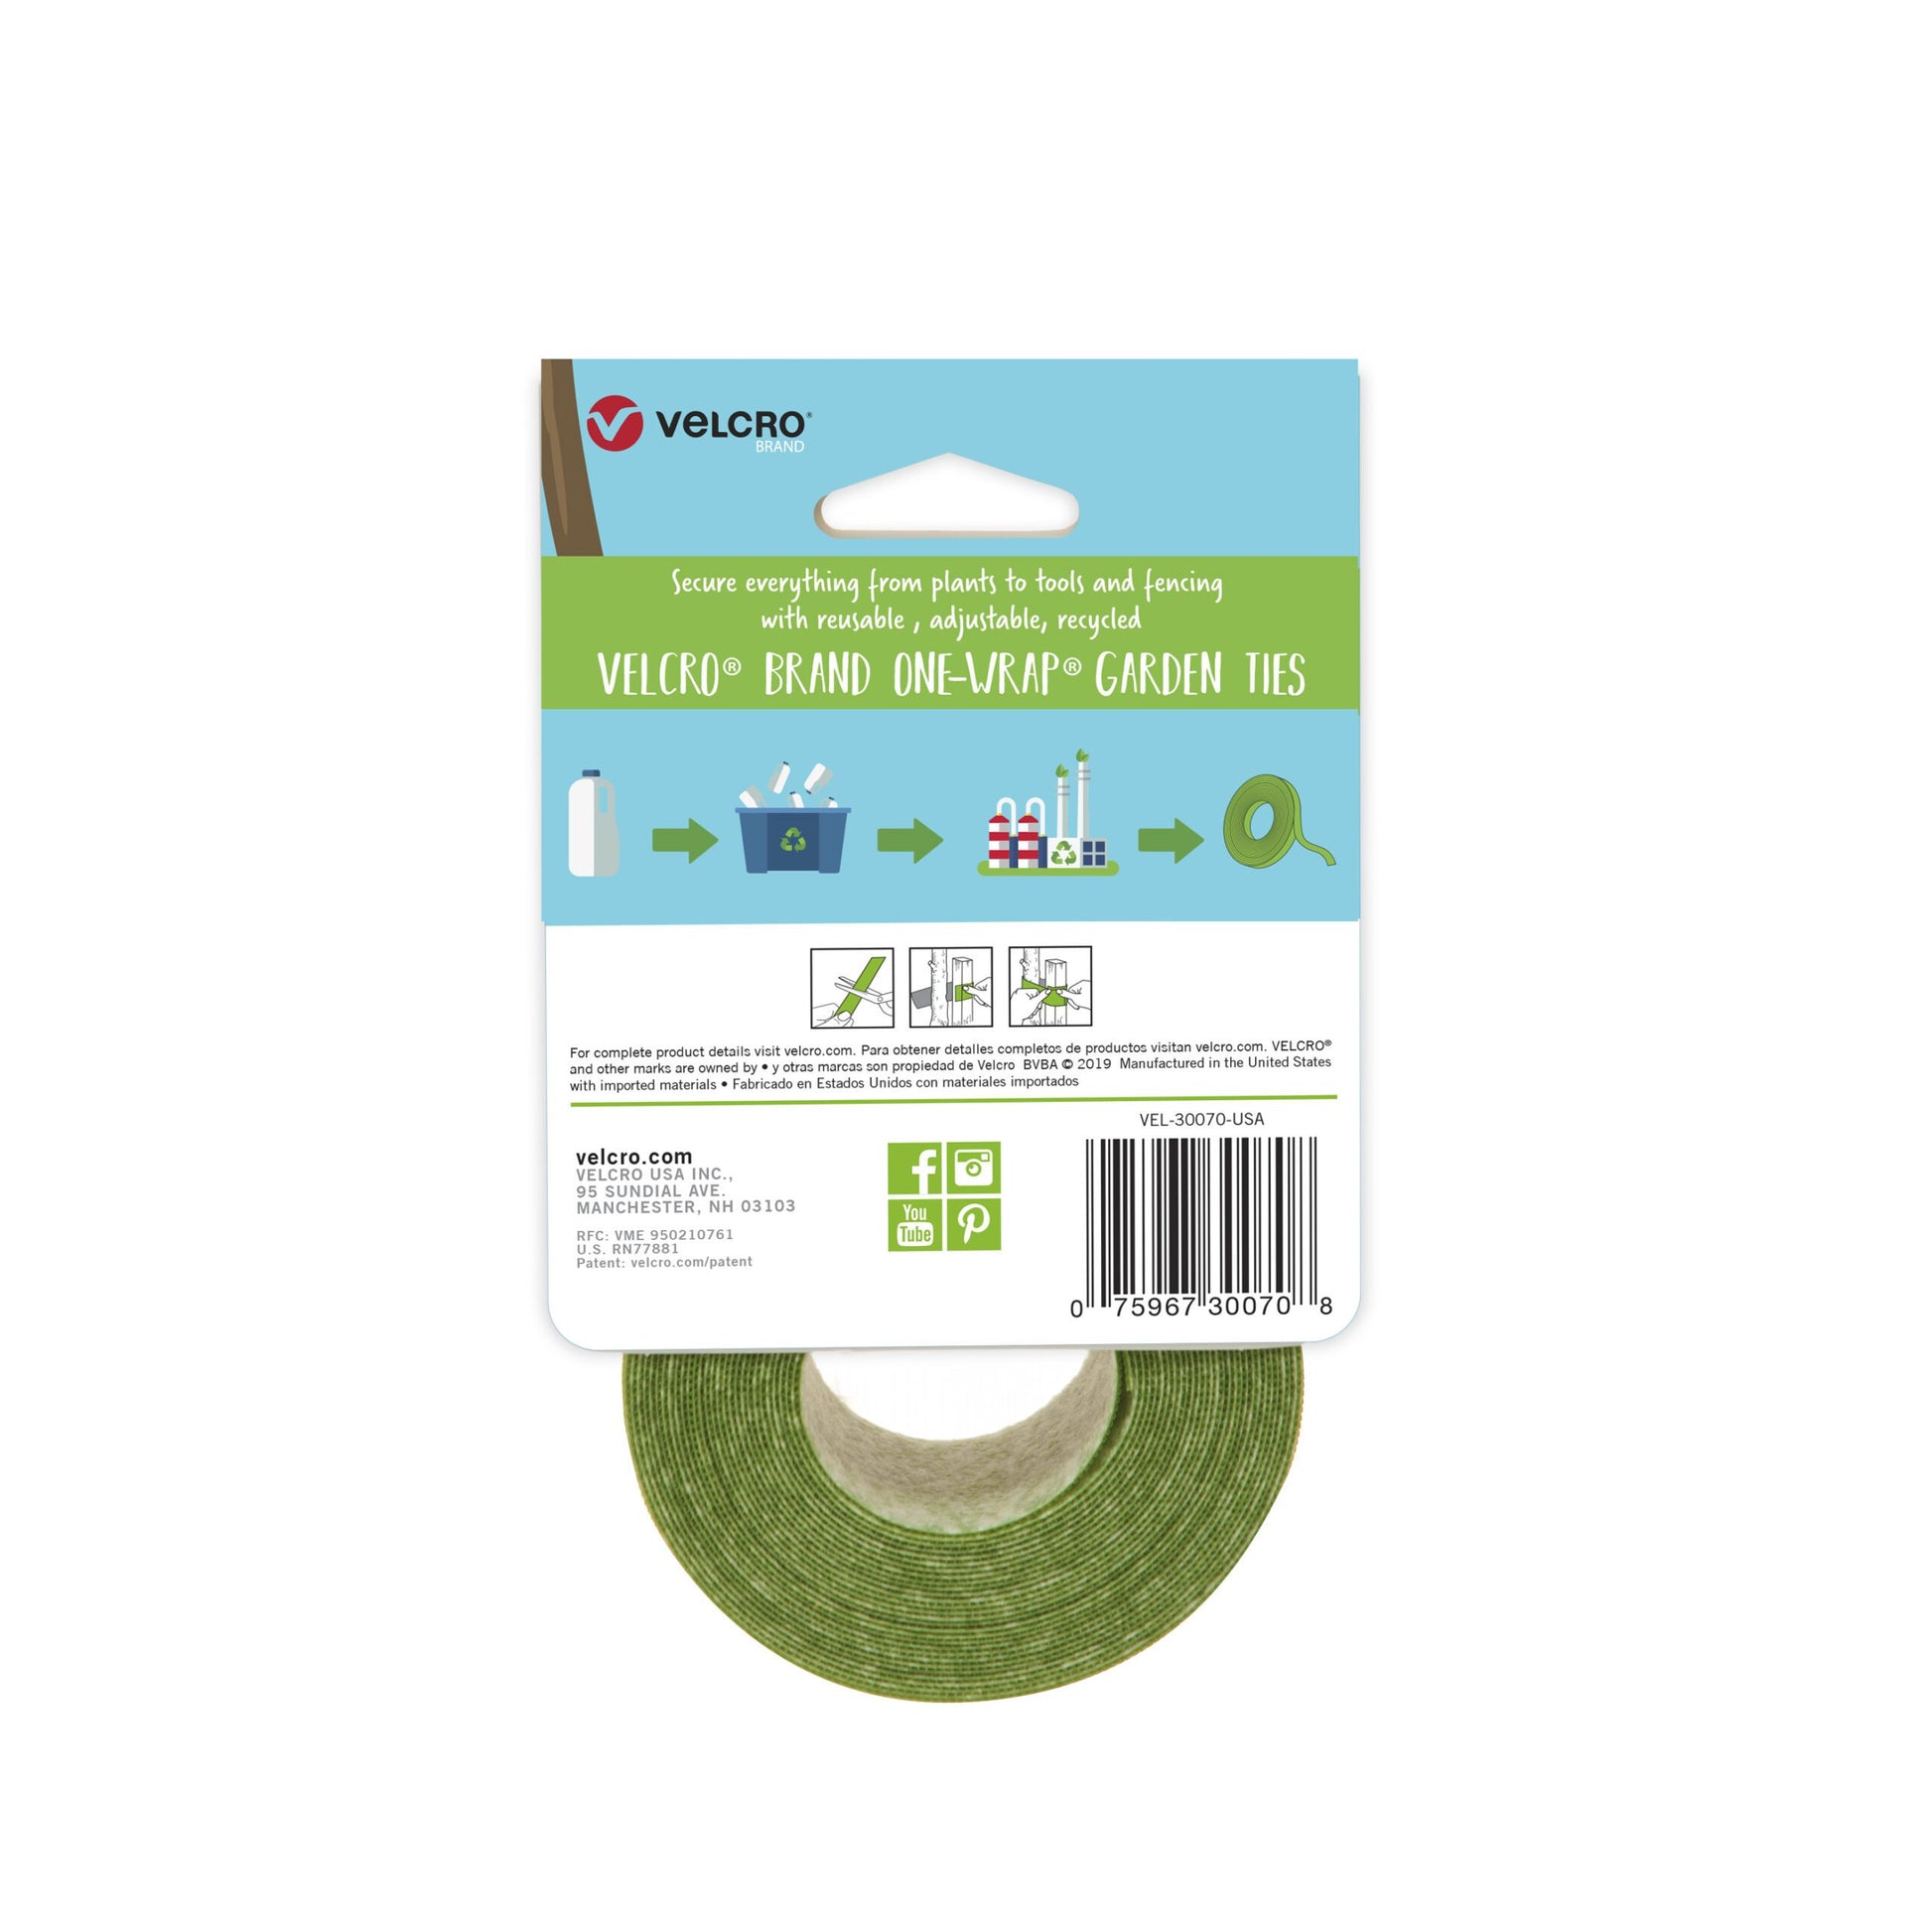 VELCRO® Brand ONE-WRAP® Garden Tree Ties are made in the US from 65% recycled plastic.